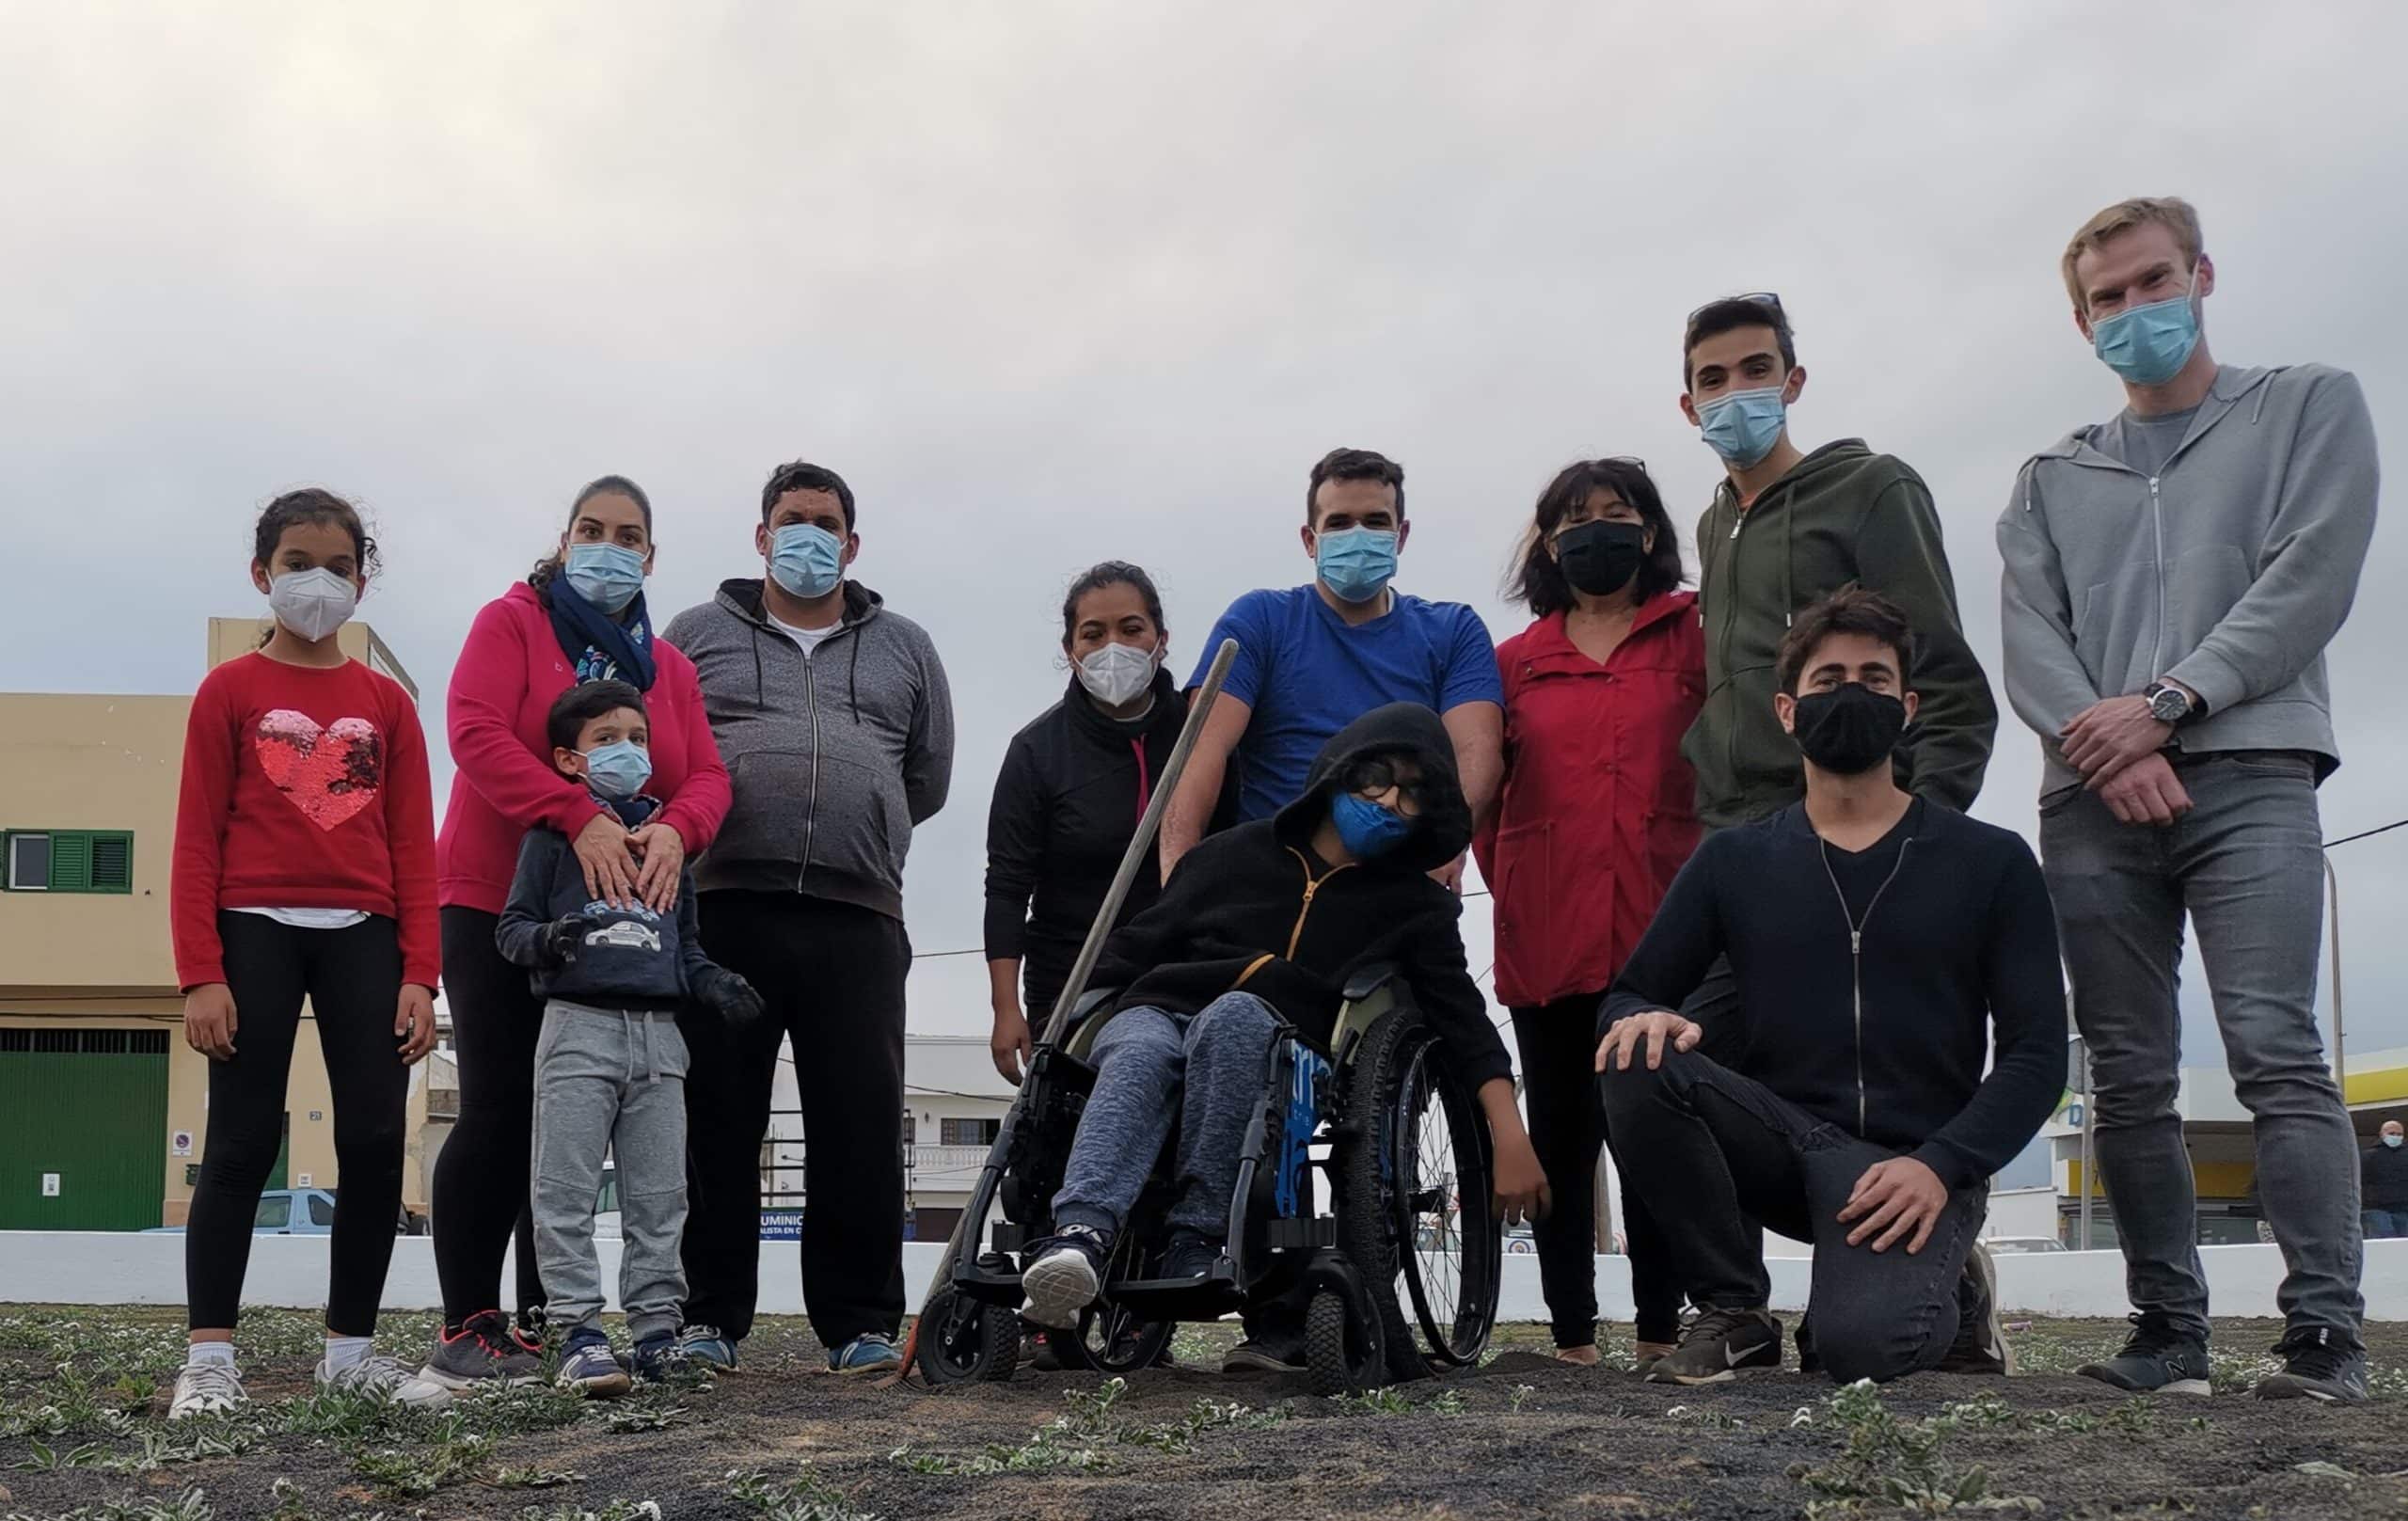 A group of people wearing masks standing in a community garden they just planted.